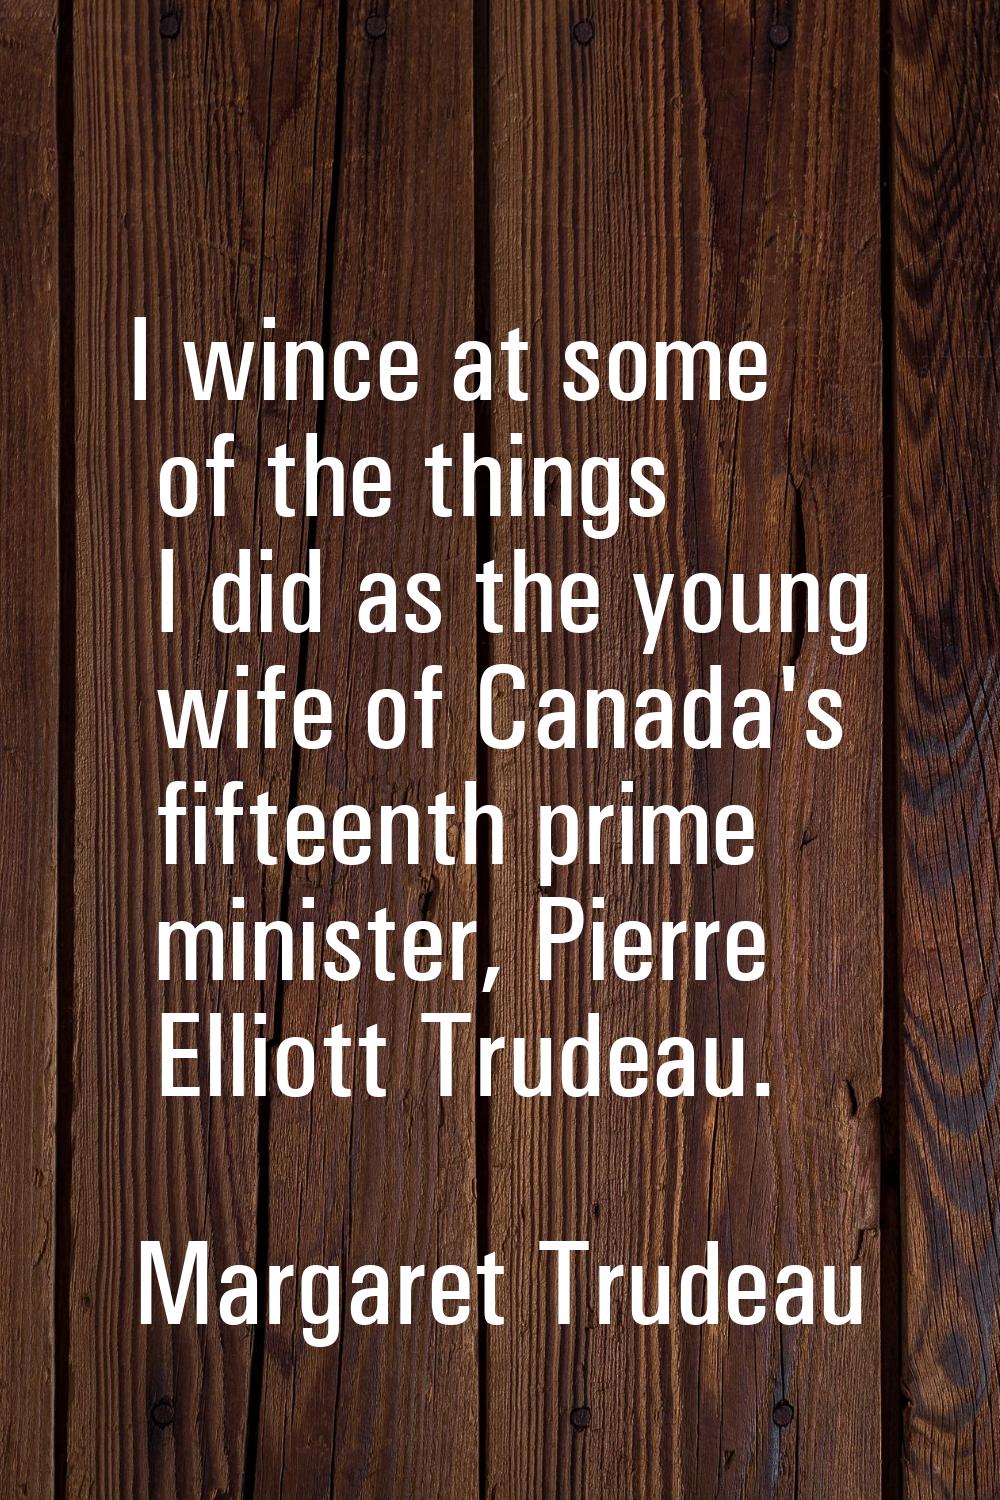 I wince at some of the things I did as the young wife of Canada's fifteenth prime minister, Pierre 